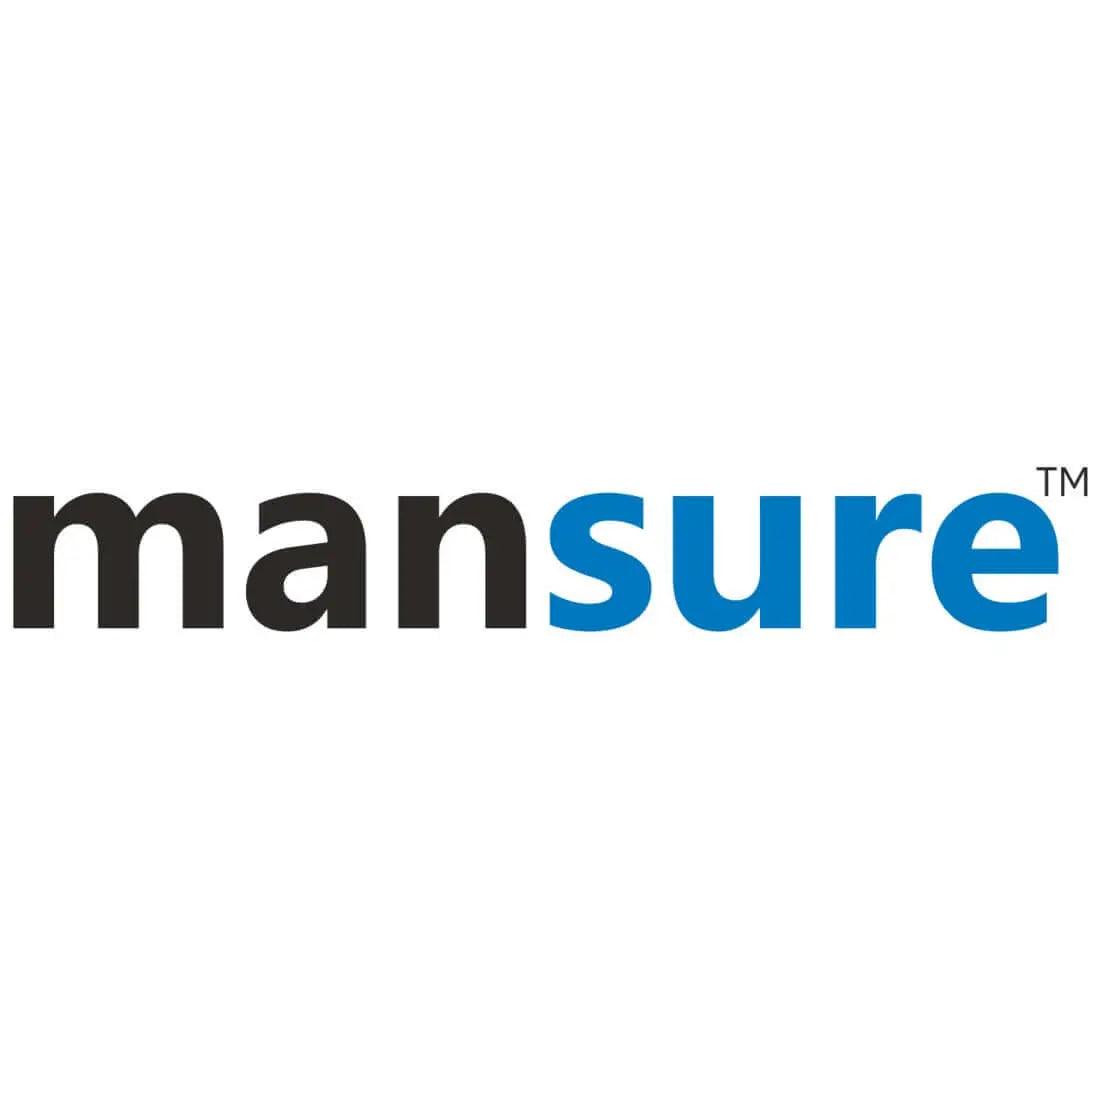 Buy 100% genuine ManSure products for men's health directly from the company's official brand store at https://everteen-neud.com/collections/mansure